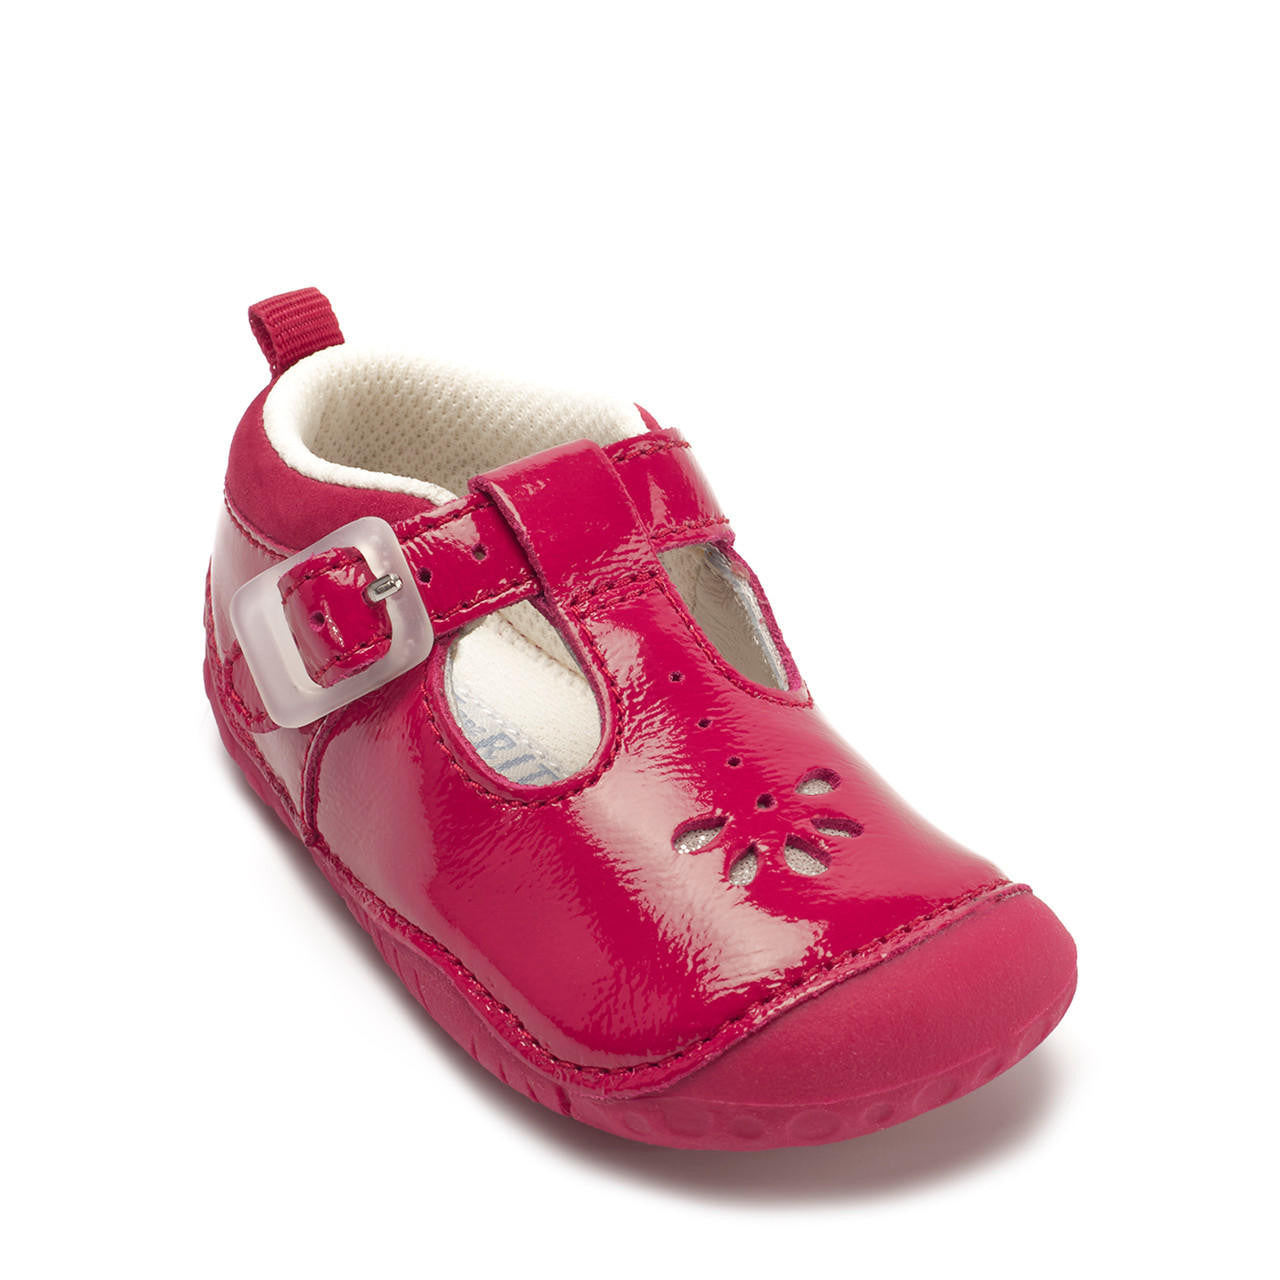 A girls T-Bar pre-walker by Start-Rite, style Baby Bubble, in red patent leather with silver punch out detail and toe bumper. Buckle fastening. Angled view.